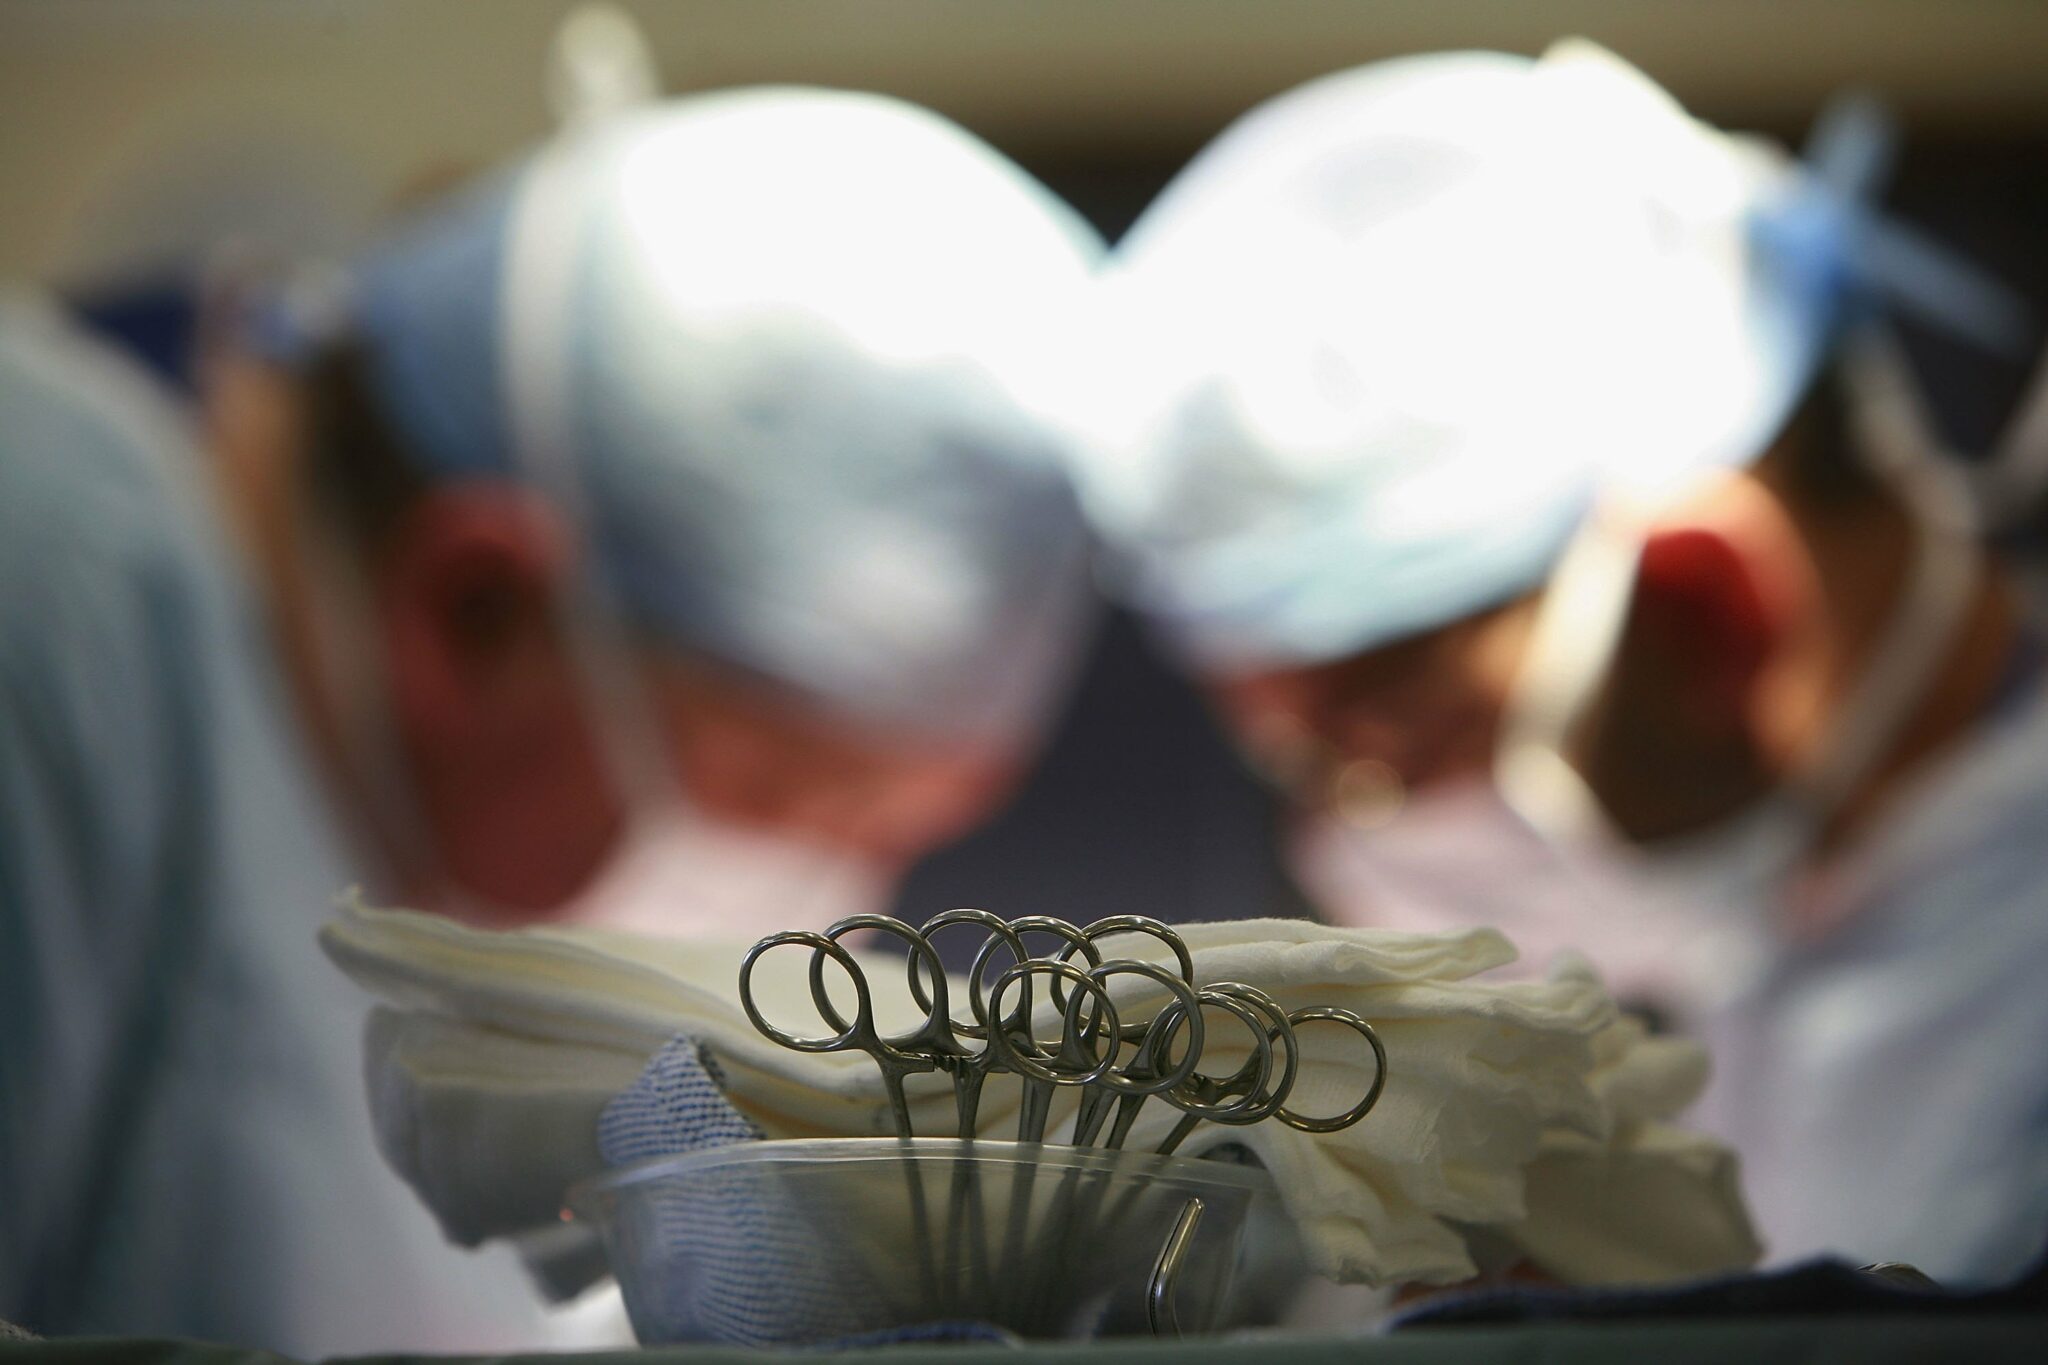 BIRMINGHAM, UNITED KINGDOM - JUNE 14:  Surgeons at The Queen Elizabeth Hospital Birmingham conduct an operation on June 14, 2006, Birmingham, England. Senior managers of the NHS have said that the organisation needs to become more open in the future. (Photo by Christopher Furlong/Getty Images)